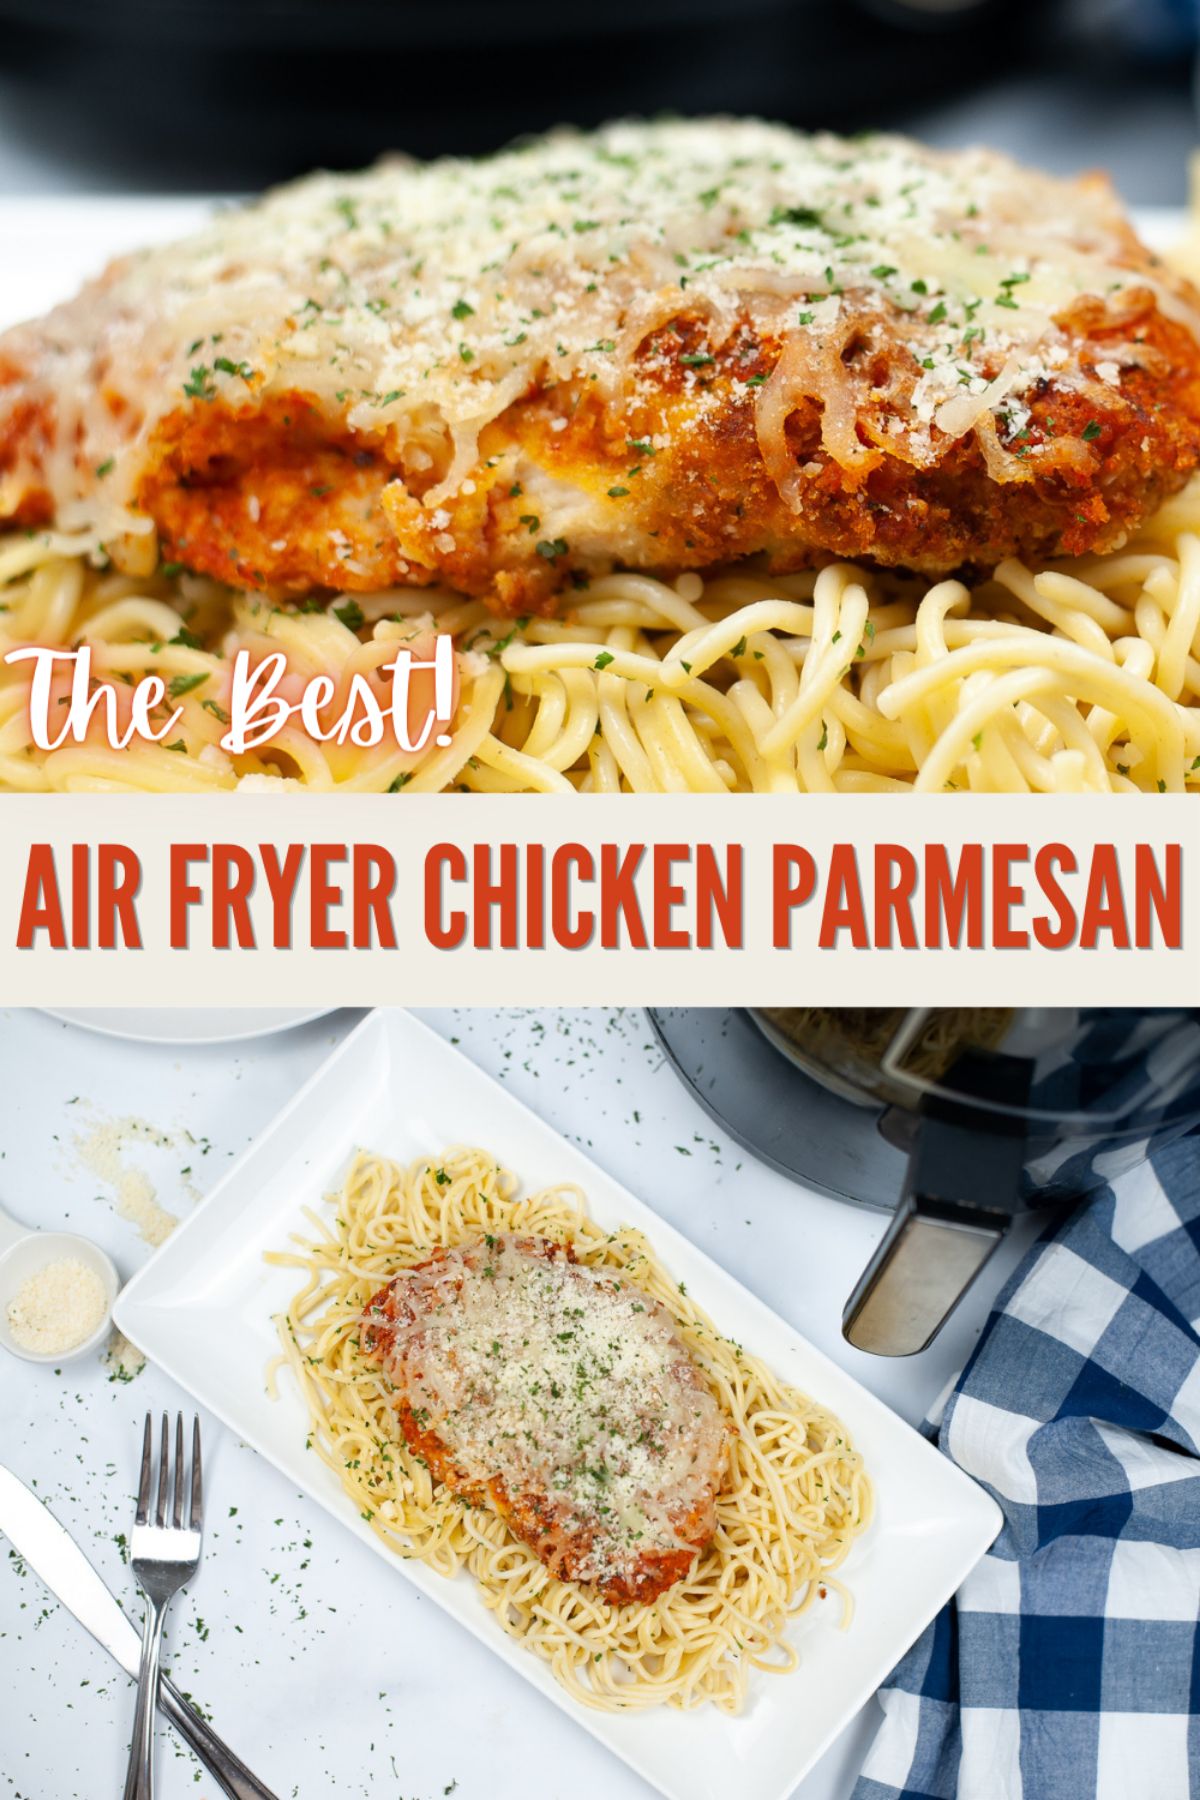 Air Fryer Parmesan Chicken is a delicious easy-to-make recipe that will leave you wanting more. It has a tasty crispy & flavorful coating. #airfryer #chickenparmesan #parmesanchicken #chicken #recipe via @wondermomwannab